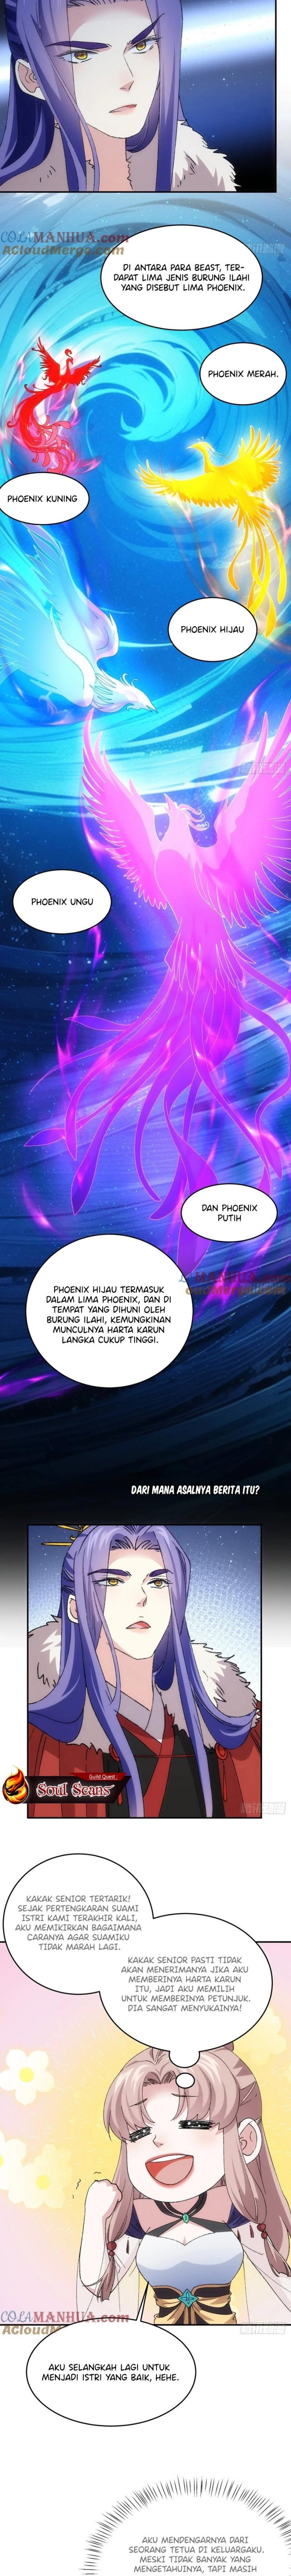 Dilarang COPAS - situs resmi www.mangacanblog.com - Komik i just dont play the card according to the routine 209 - chapter 209 210 Indonesia i just dont play the card according to the routine 209 - chapter 209 Terbaru 2|Baca Manga Komik Indonesia|Mangacan